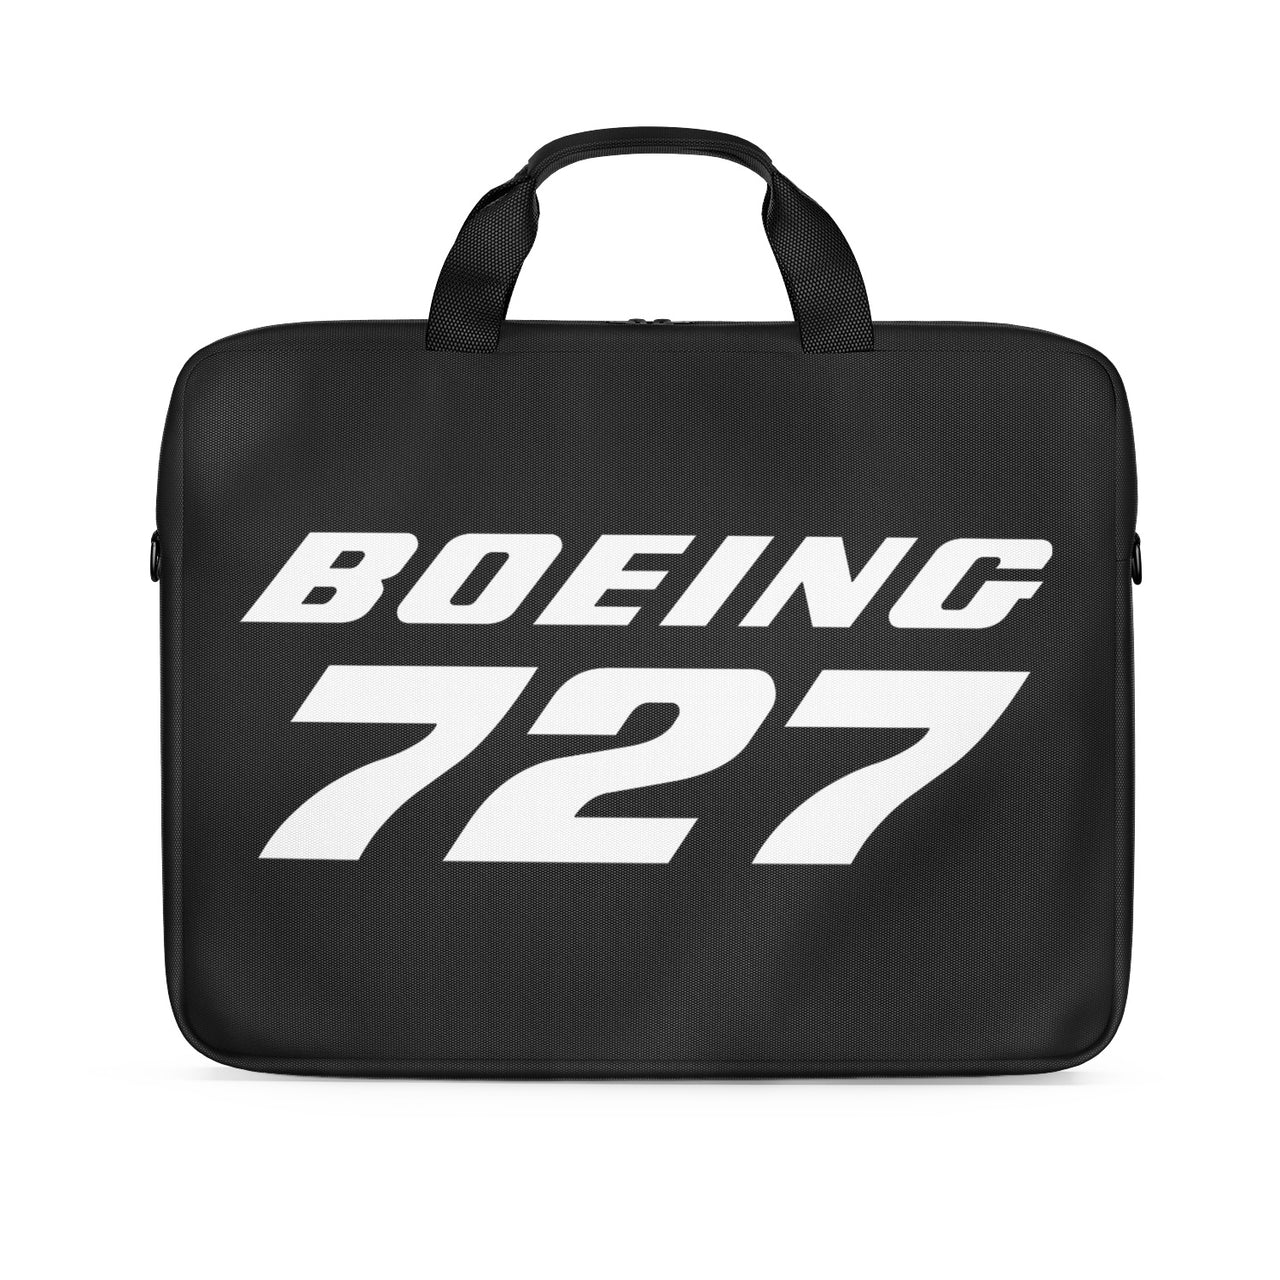 Boeing 727 & Text Designed Laptop & Tablet Bags